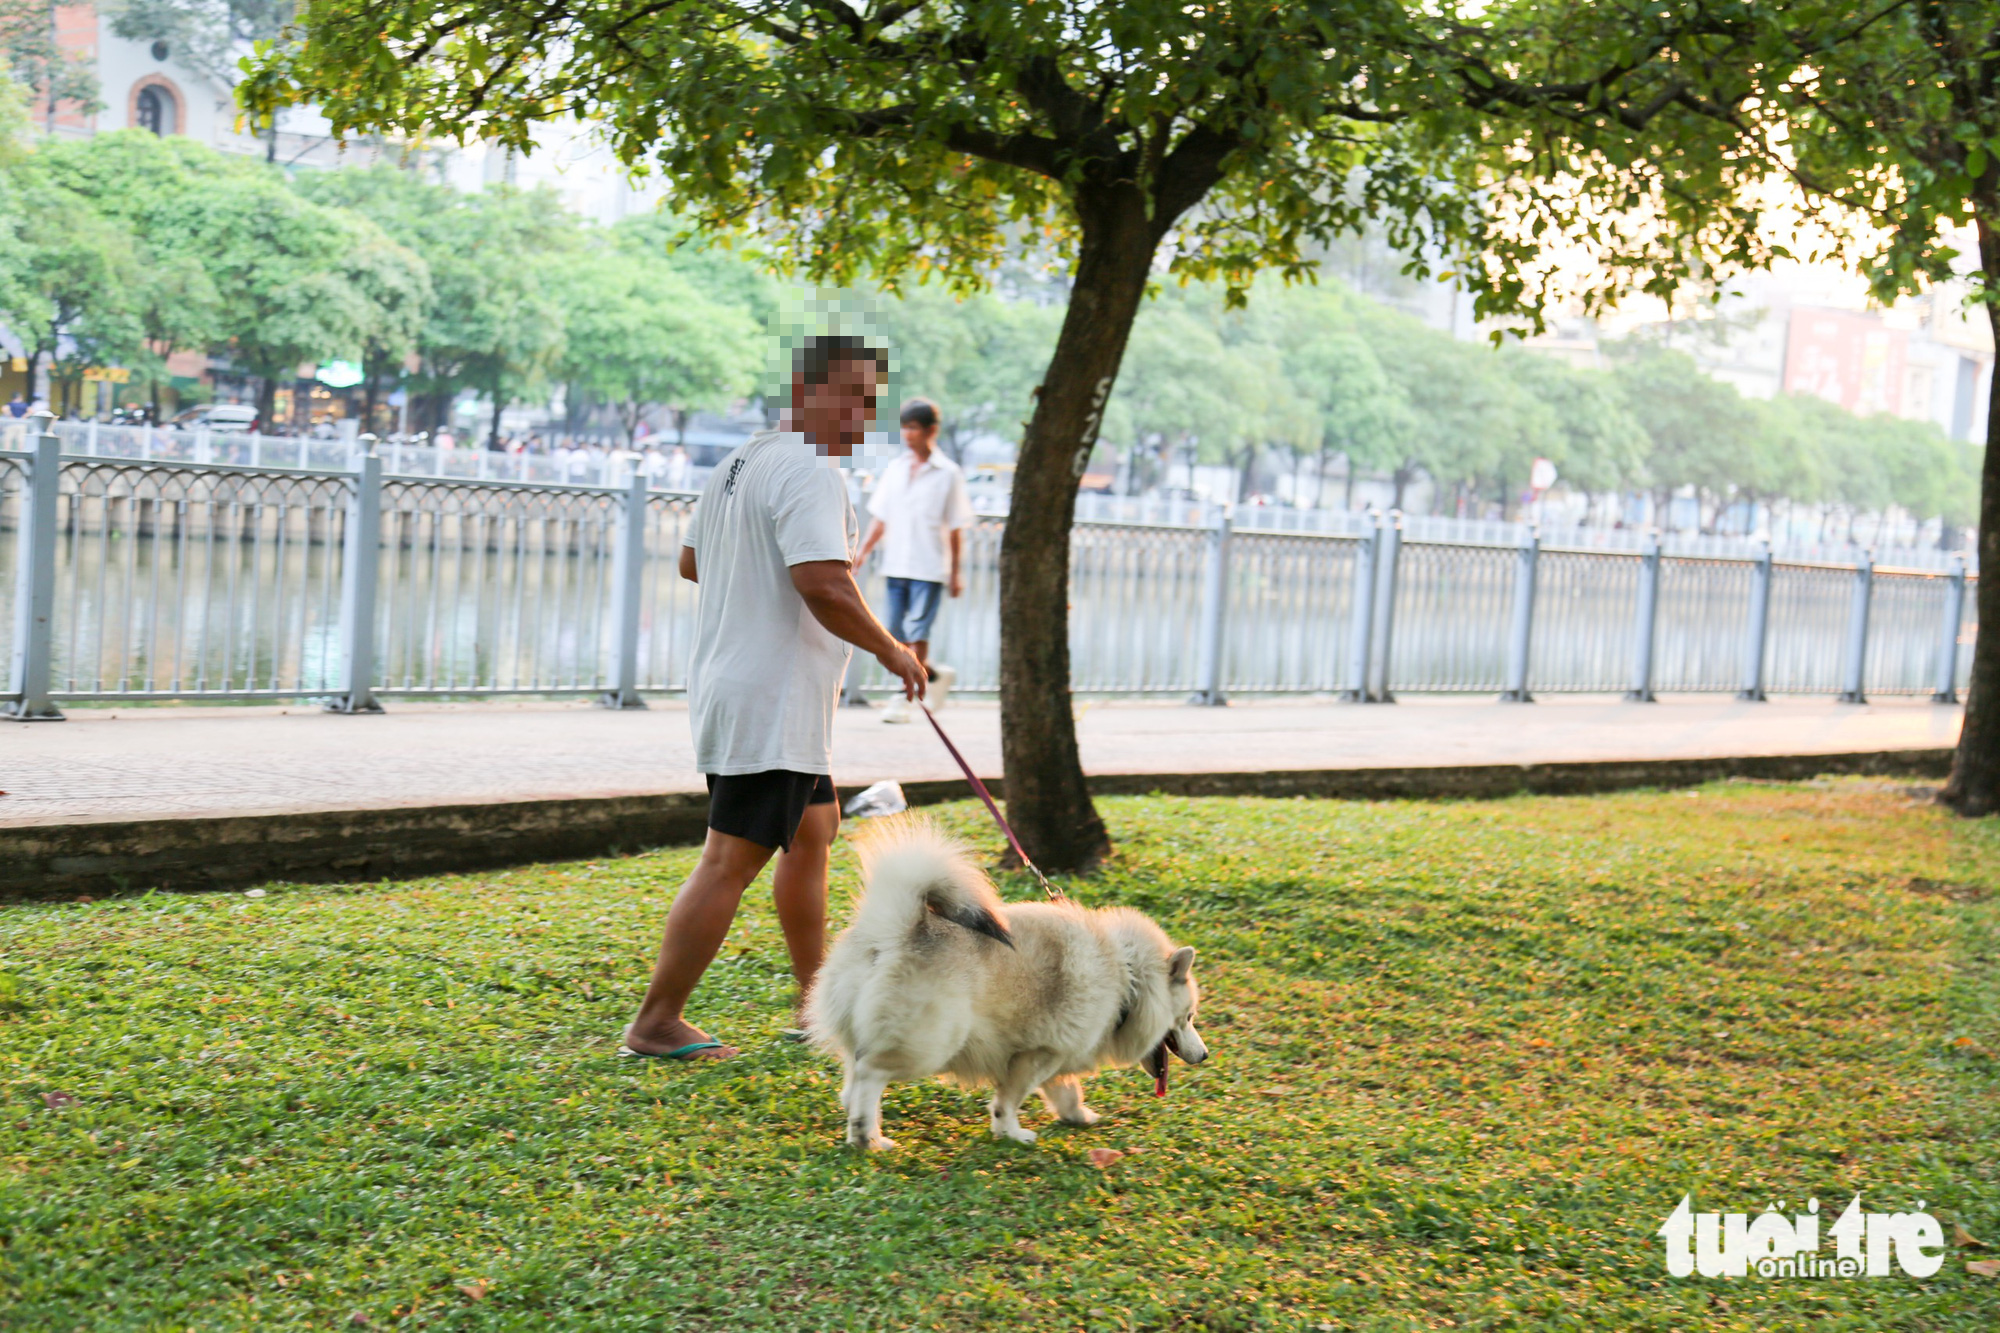 A person takes a dog to poop at the green space along Nhieu Loc-Thi Nghe Canal in Phu Nhuan District, Ho Chi Minh City. Photo: Phuong Quyen / Tuoi Tre